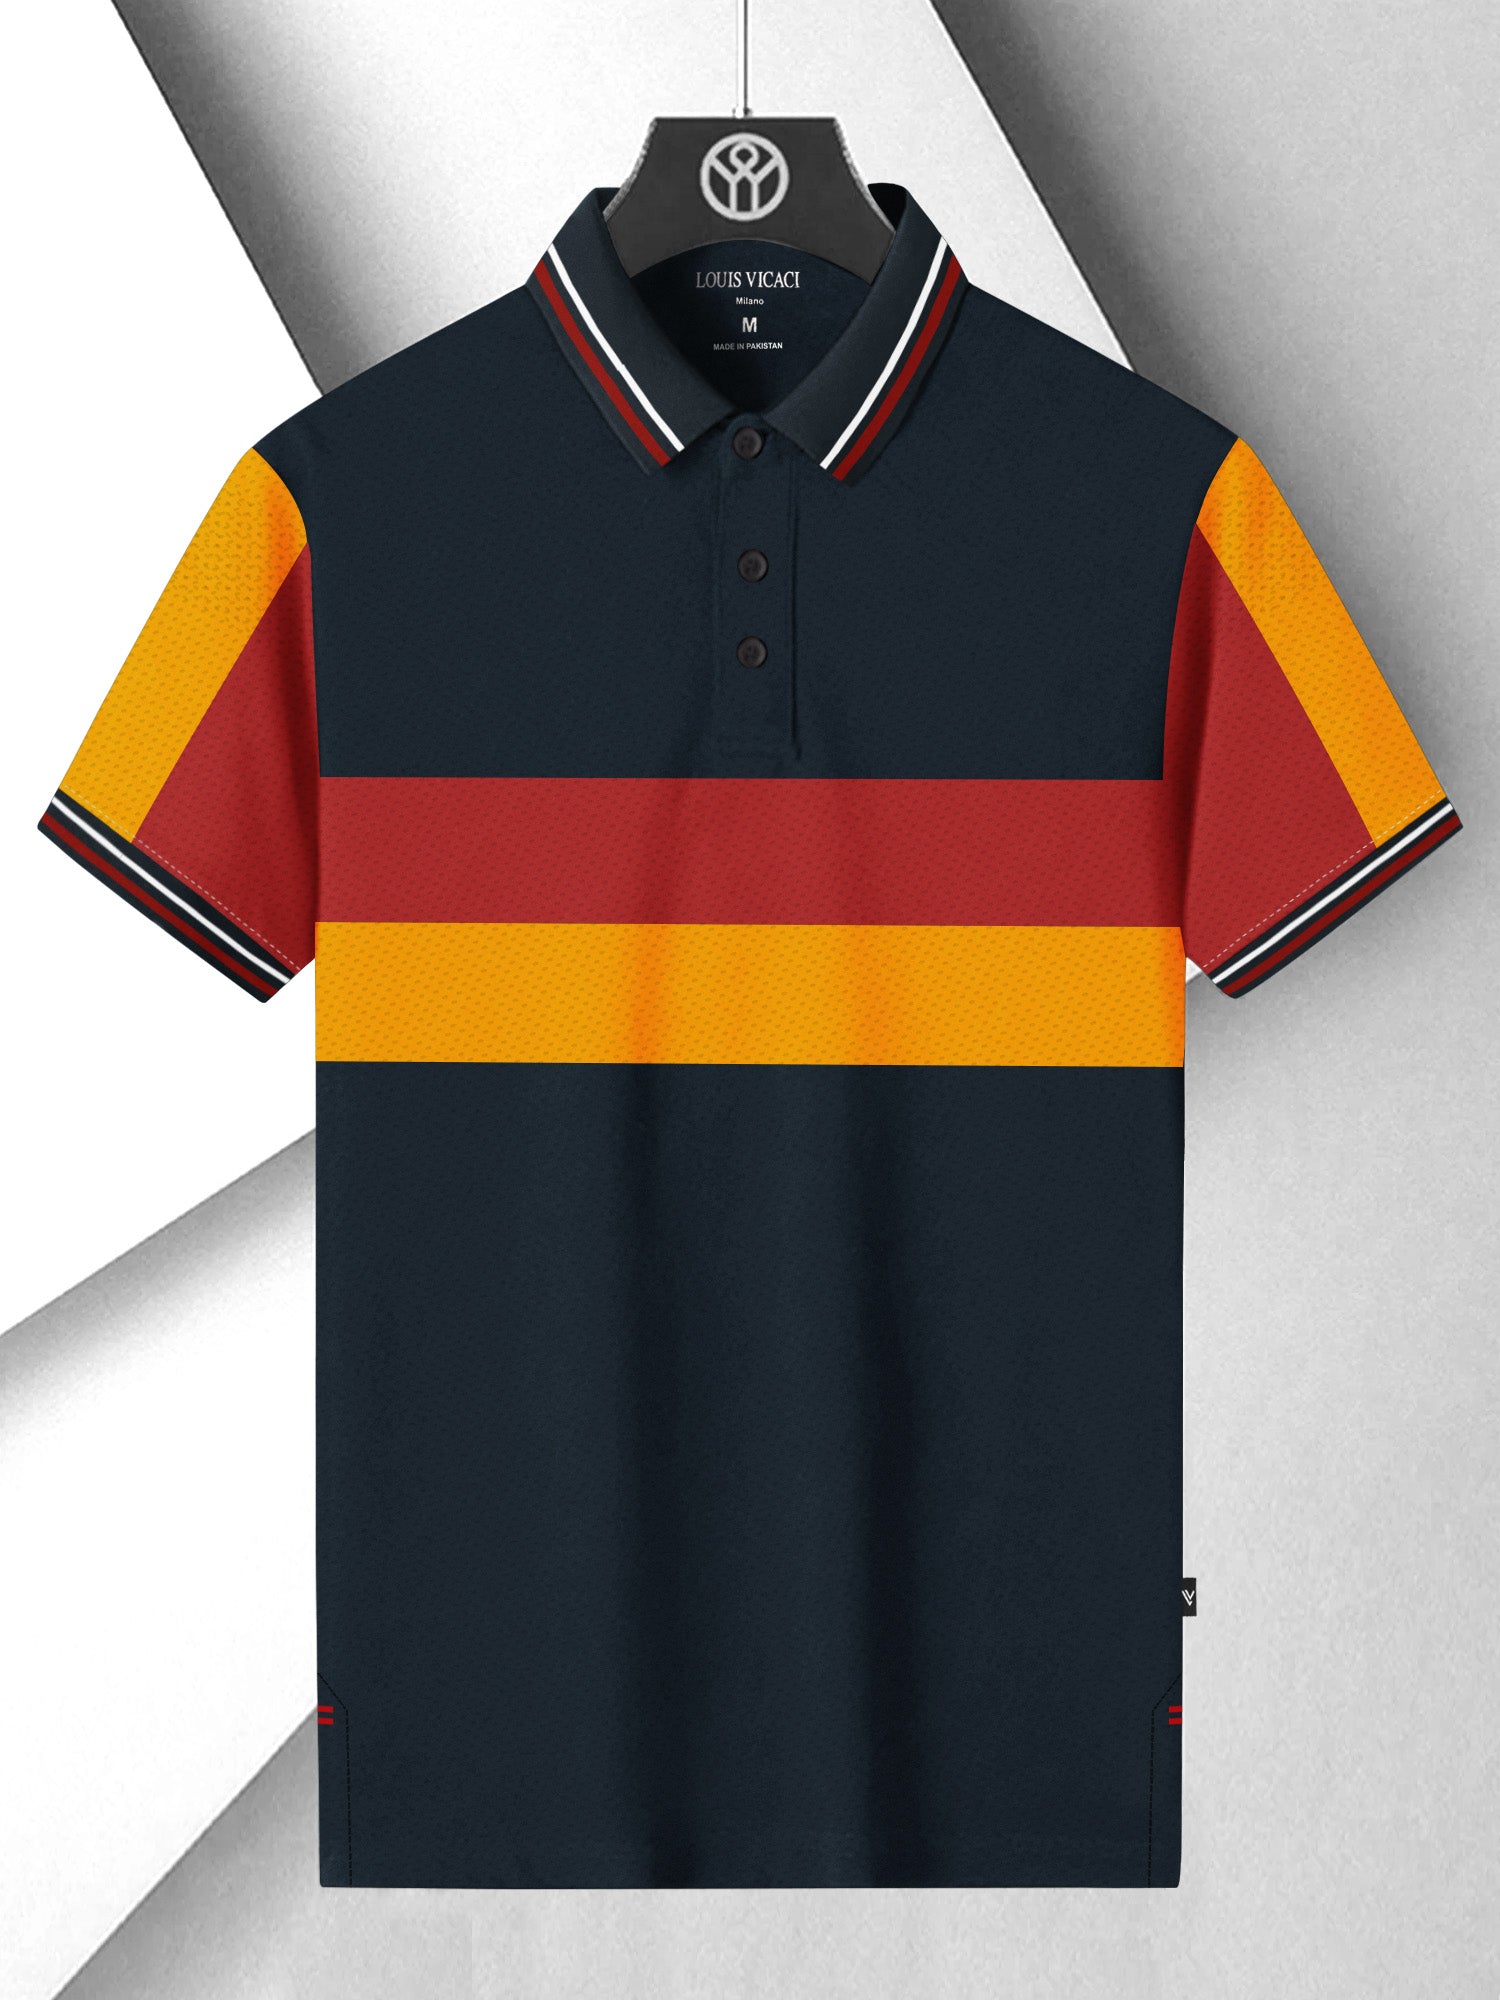 LV Summer Active Wear Polo Shirt For Men-Navy with Red & Orange Panel-SP2658/RT2532